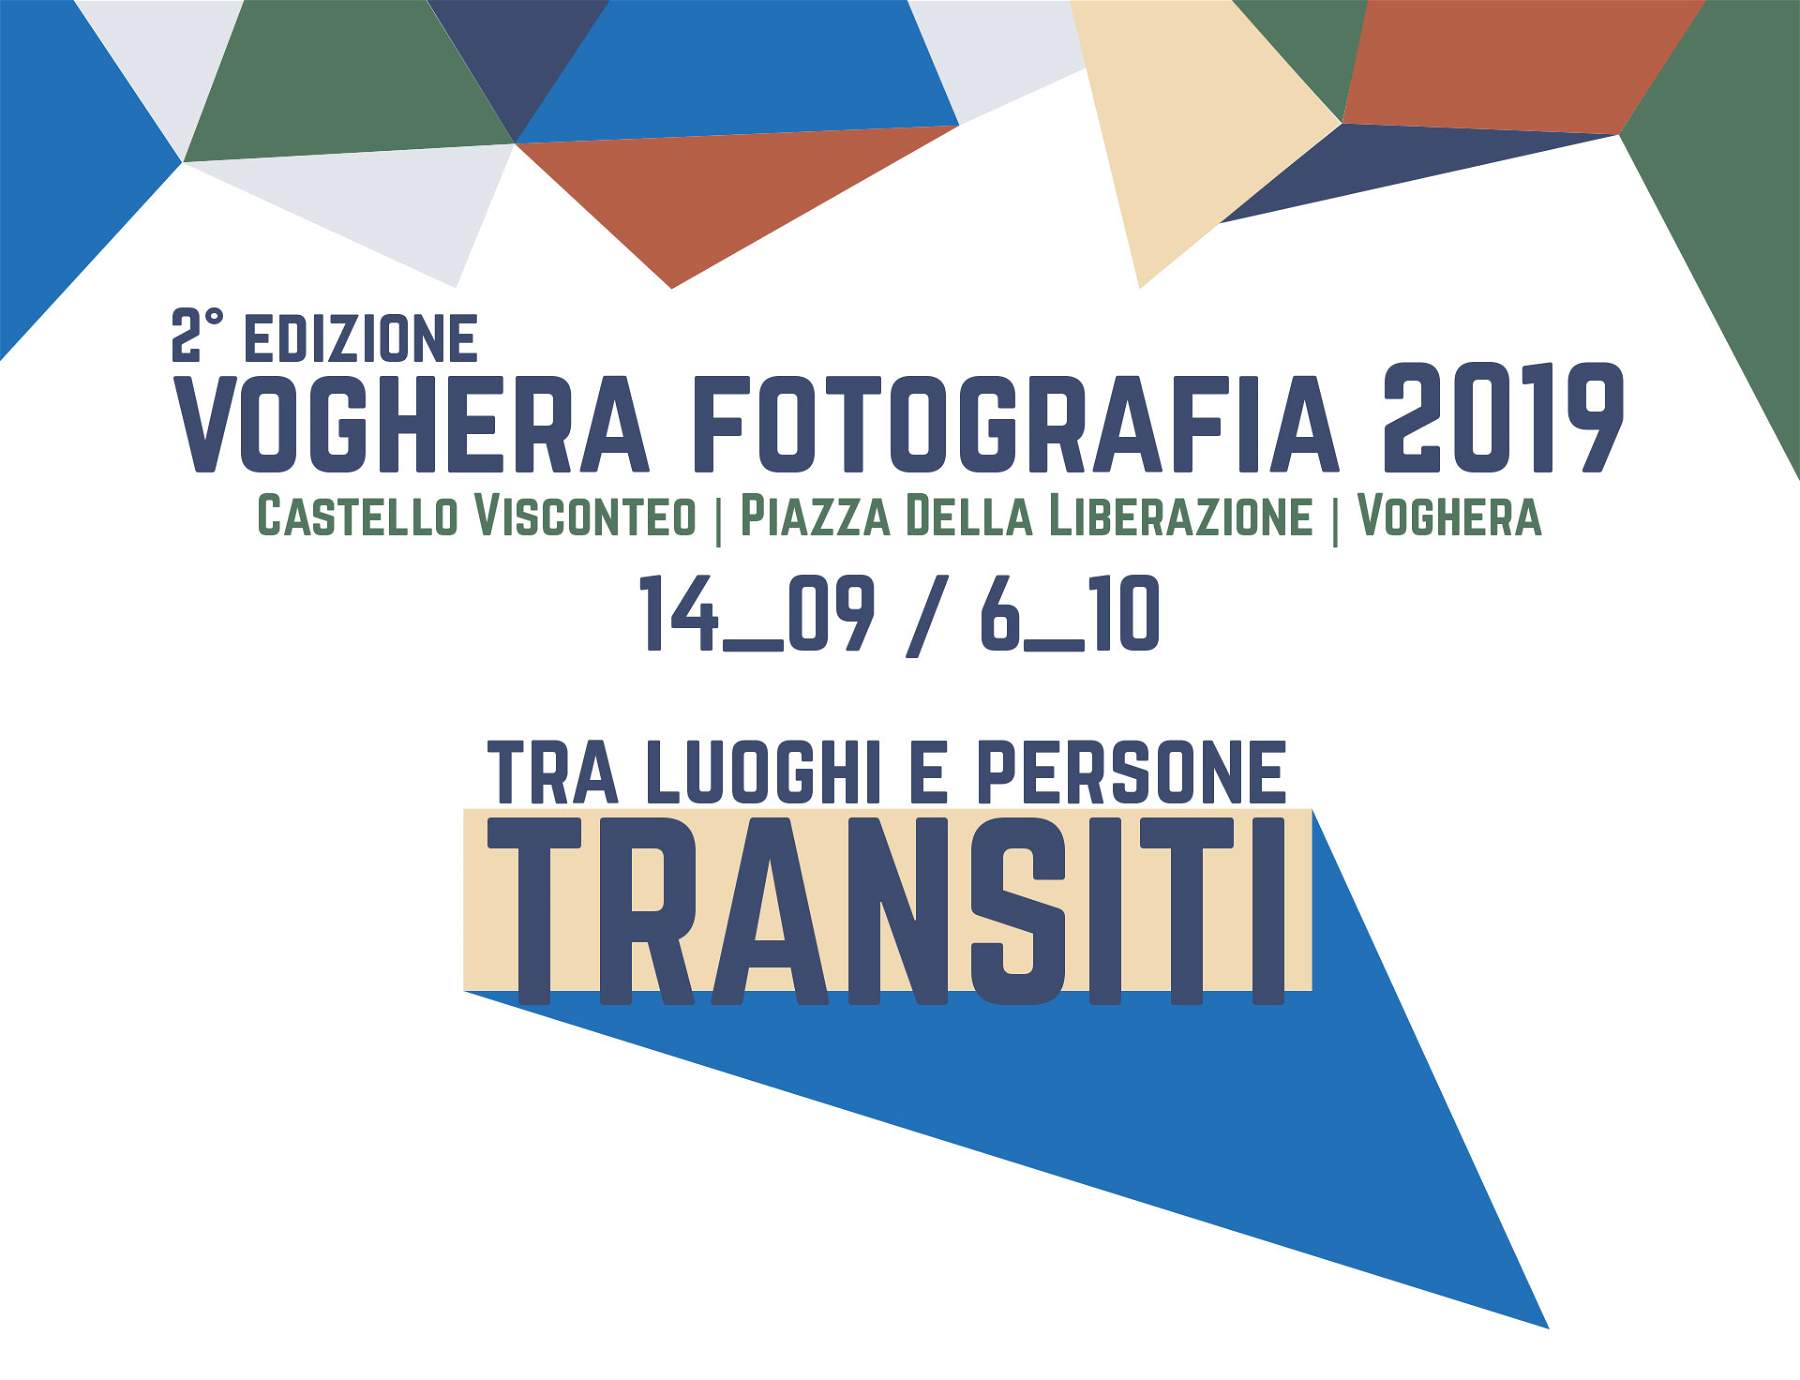 The second edition of Voghera Fotografia runs from Sept. 14 to Oct. 6